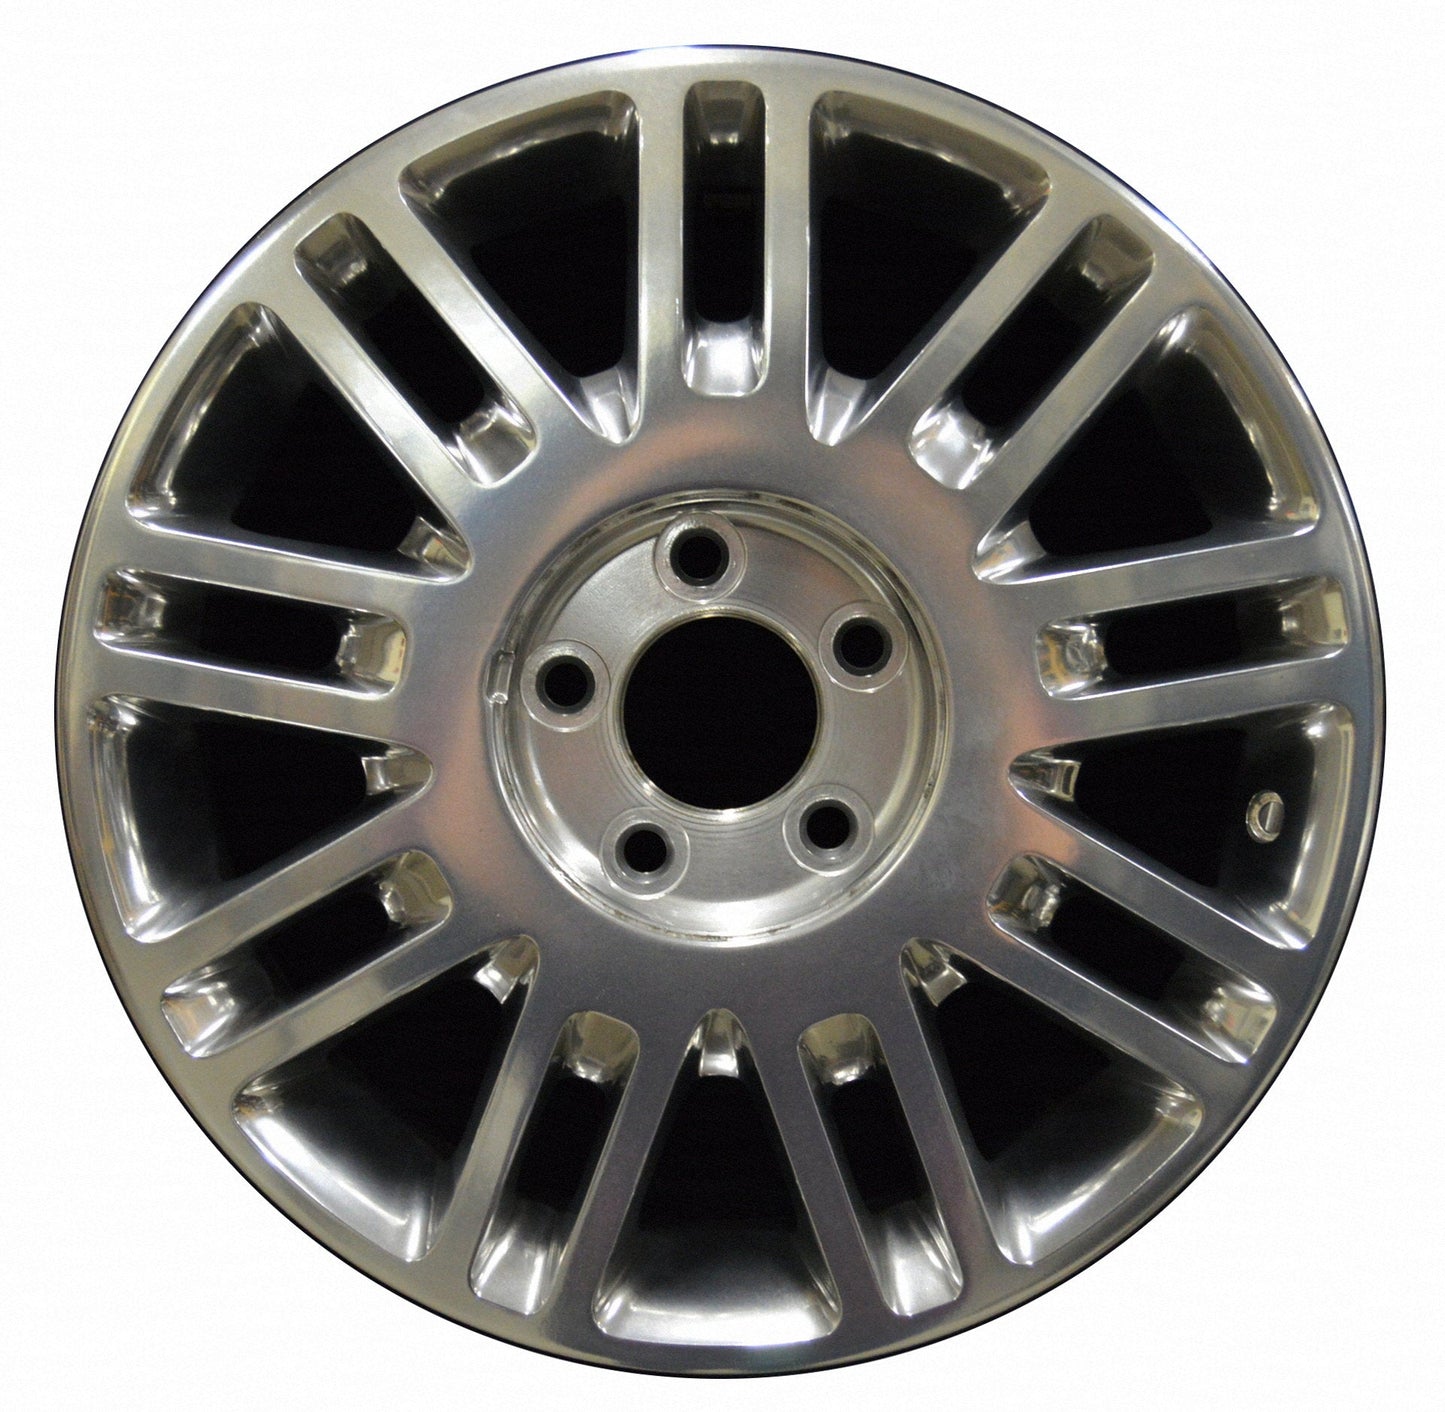 Lincoln Town Car  2006, 2007, 2008, 2009, 2010, 2011 Factory OEM Car Wheel Size 17x7 Alloy WAO.3637.FULL.POL